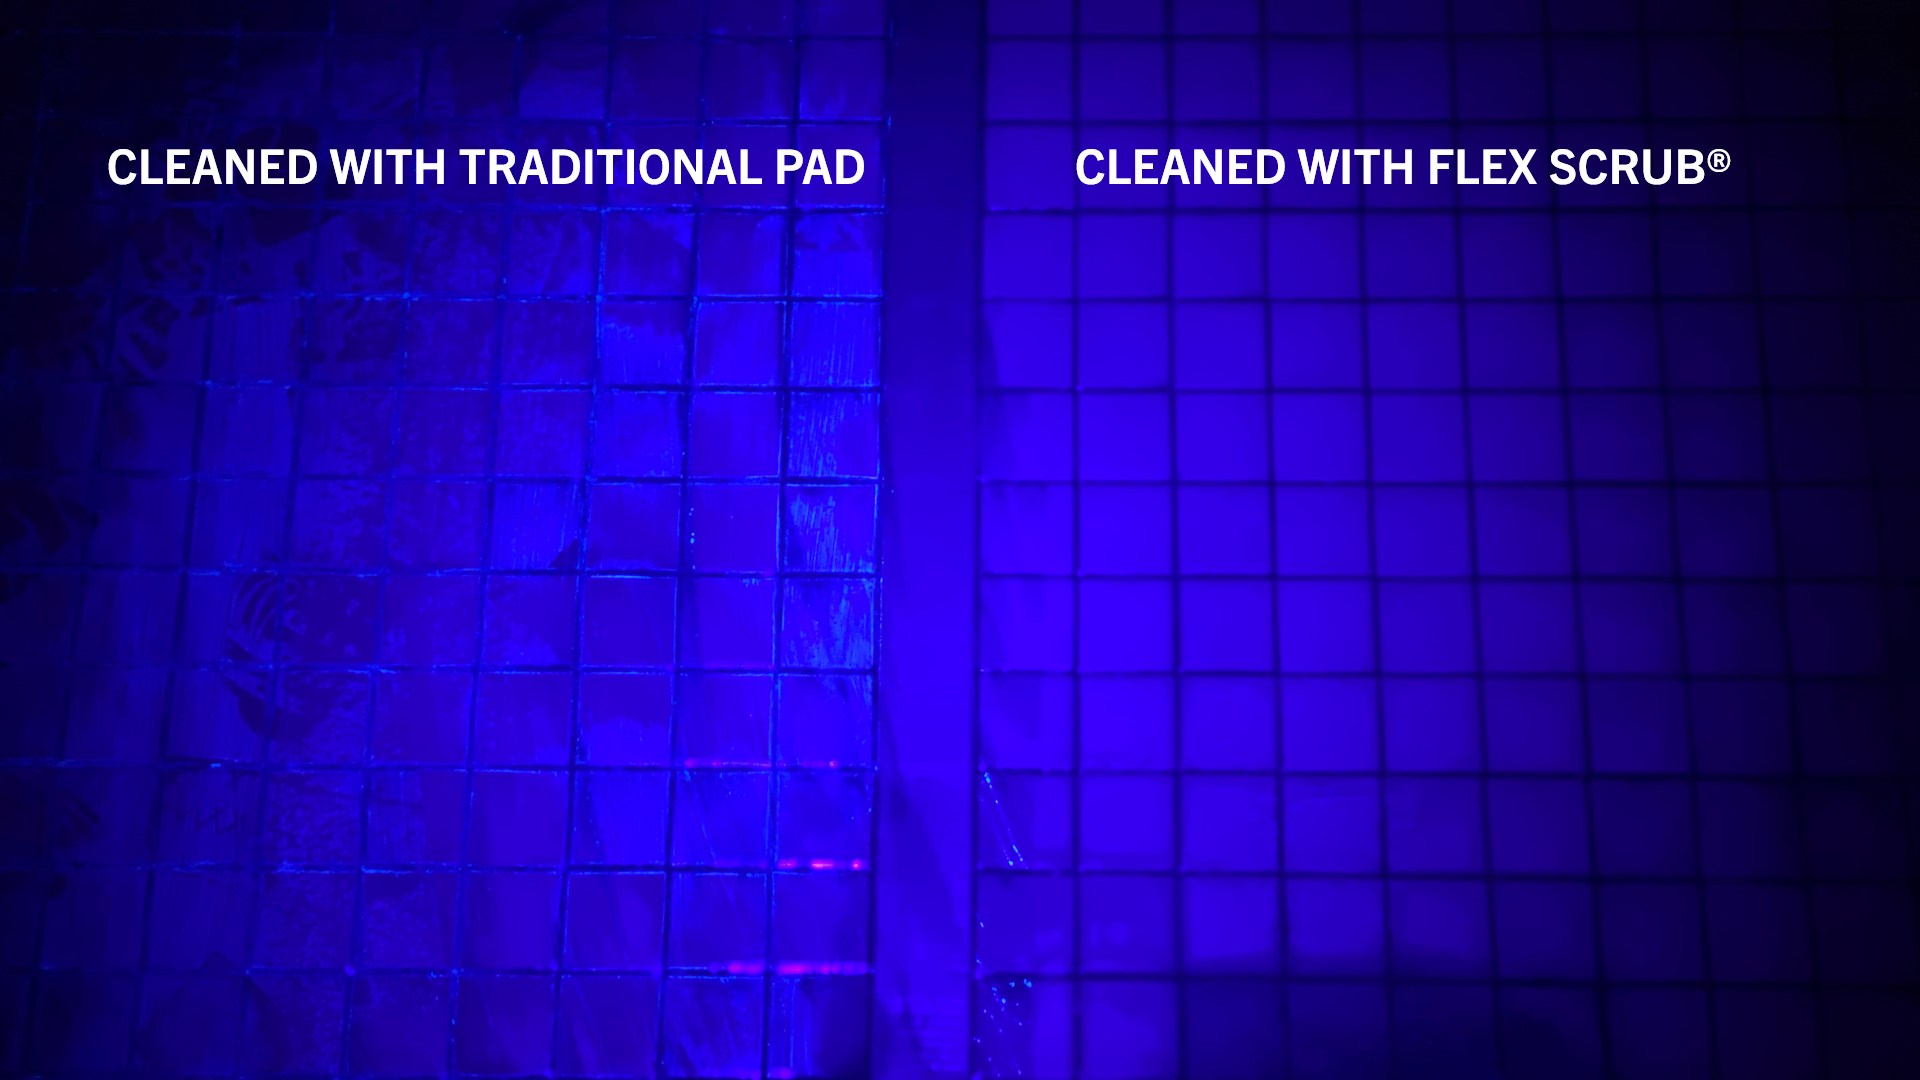 Before and after Flex Scrub on Grouted Tile under UV Light